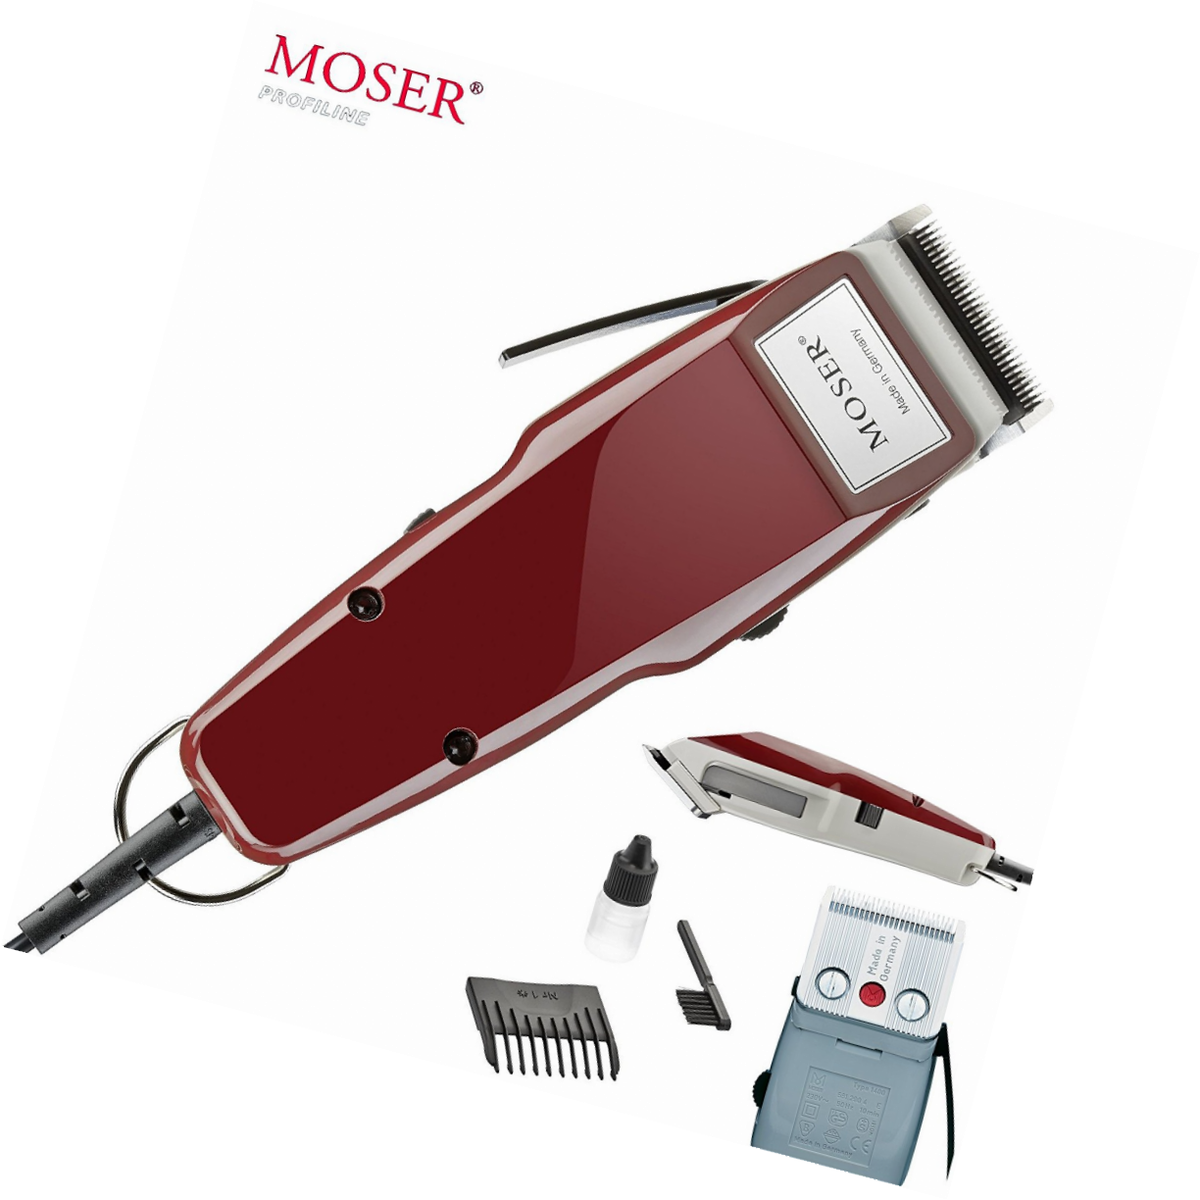 Moser Tondeuse a cheveux Type 1400